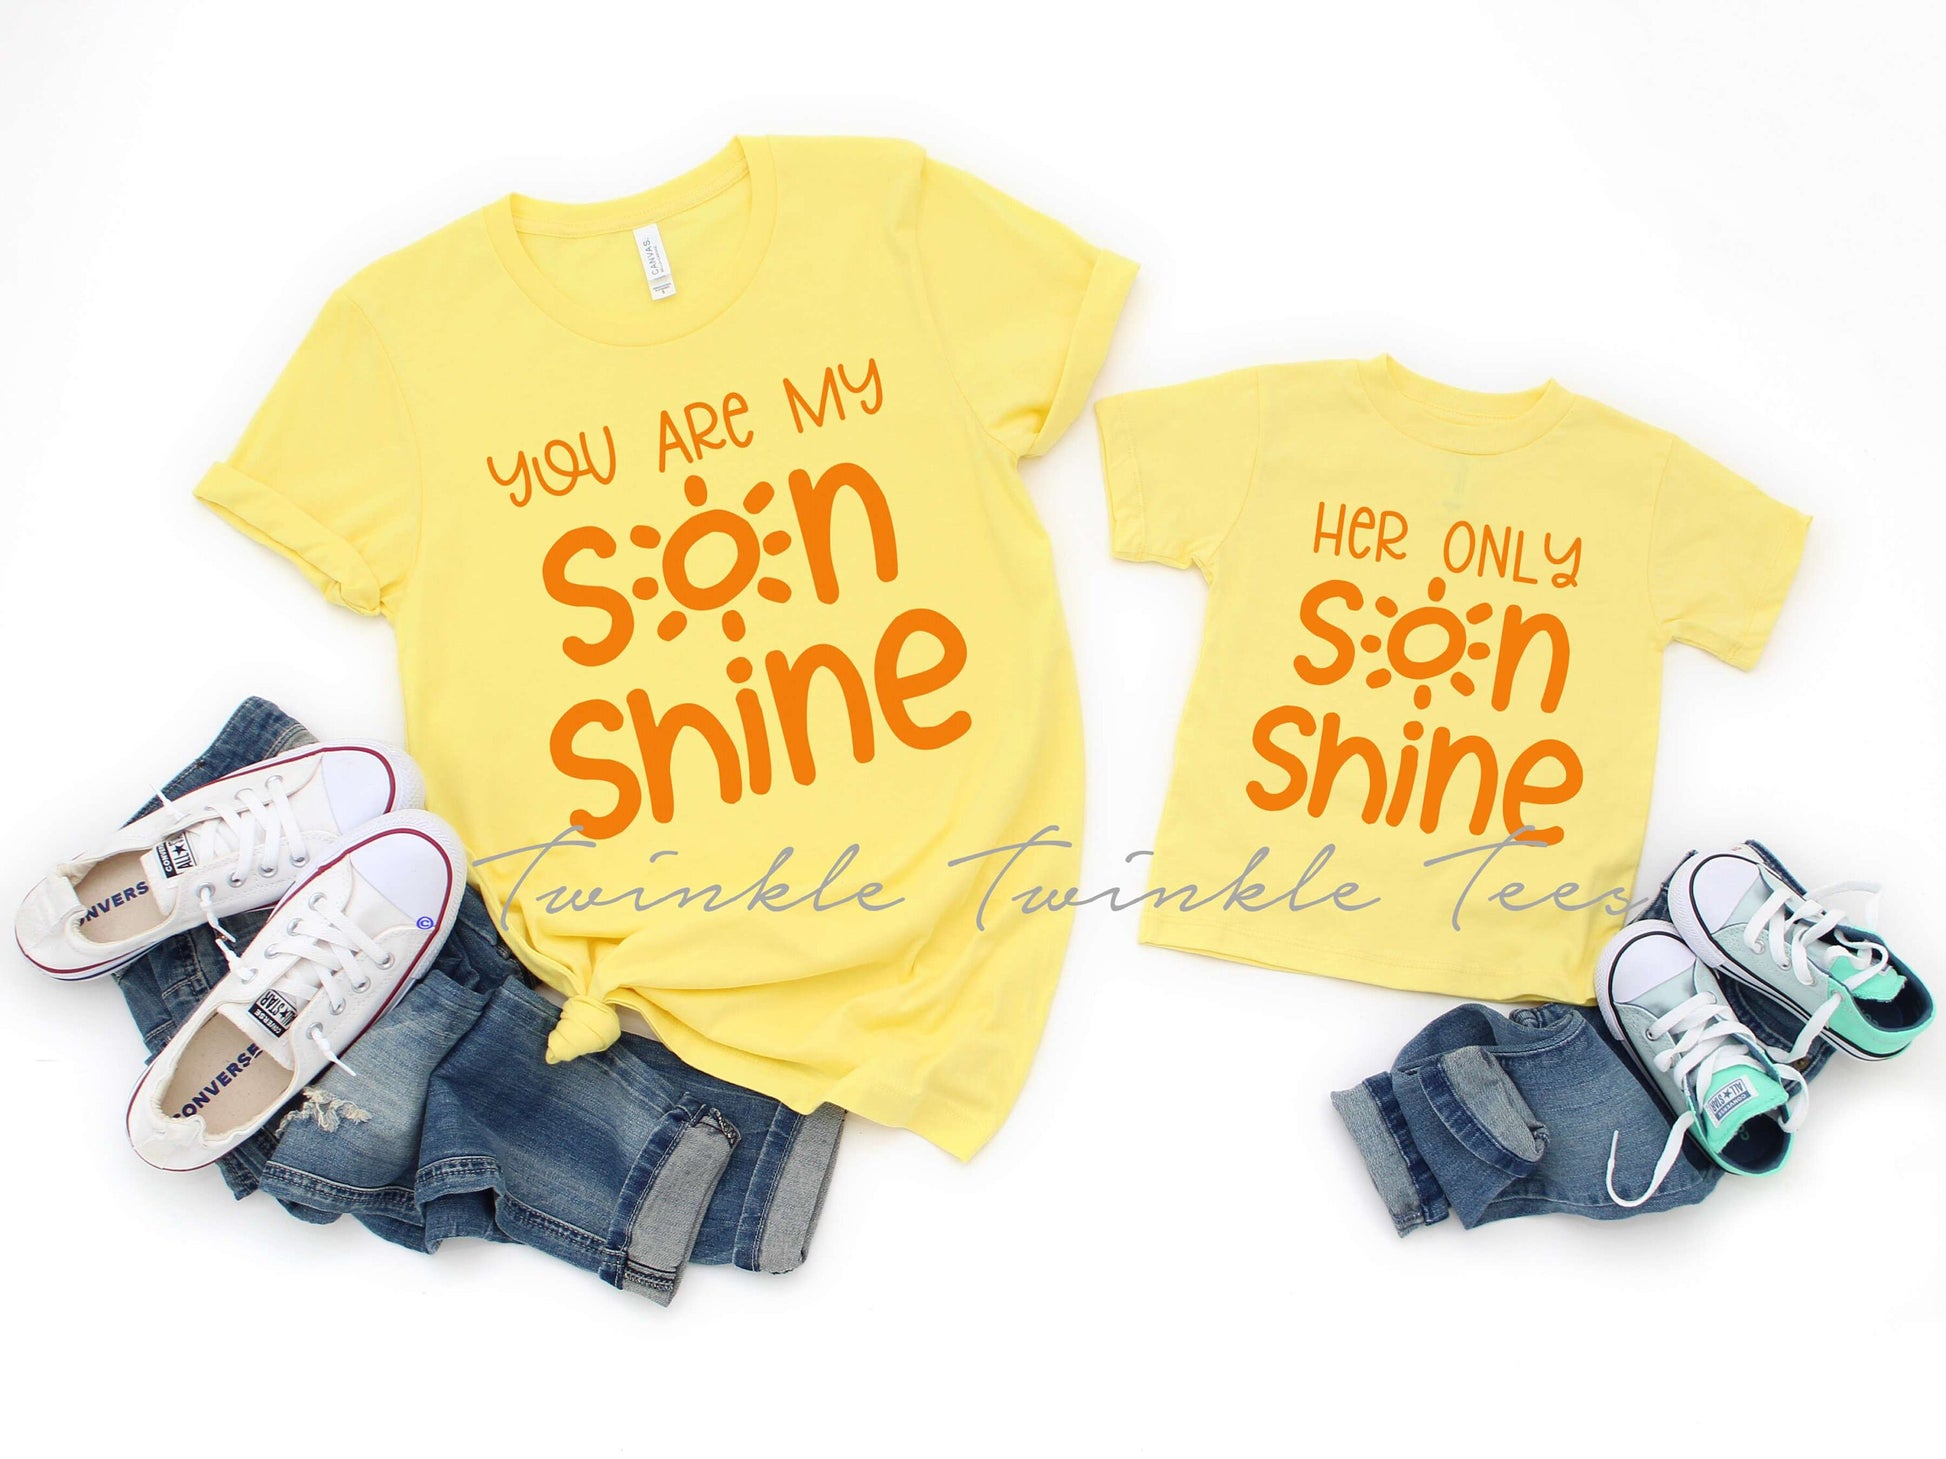 You are My SonShine, Her Only SonShine Unisex Matching t-shirts - Mommy and Me Shirts - Gift for Mom - Mommy and Son Shirts - Mother's Day